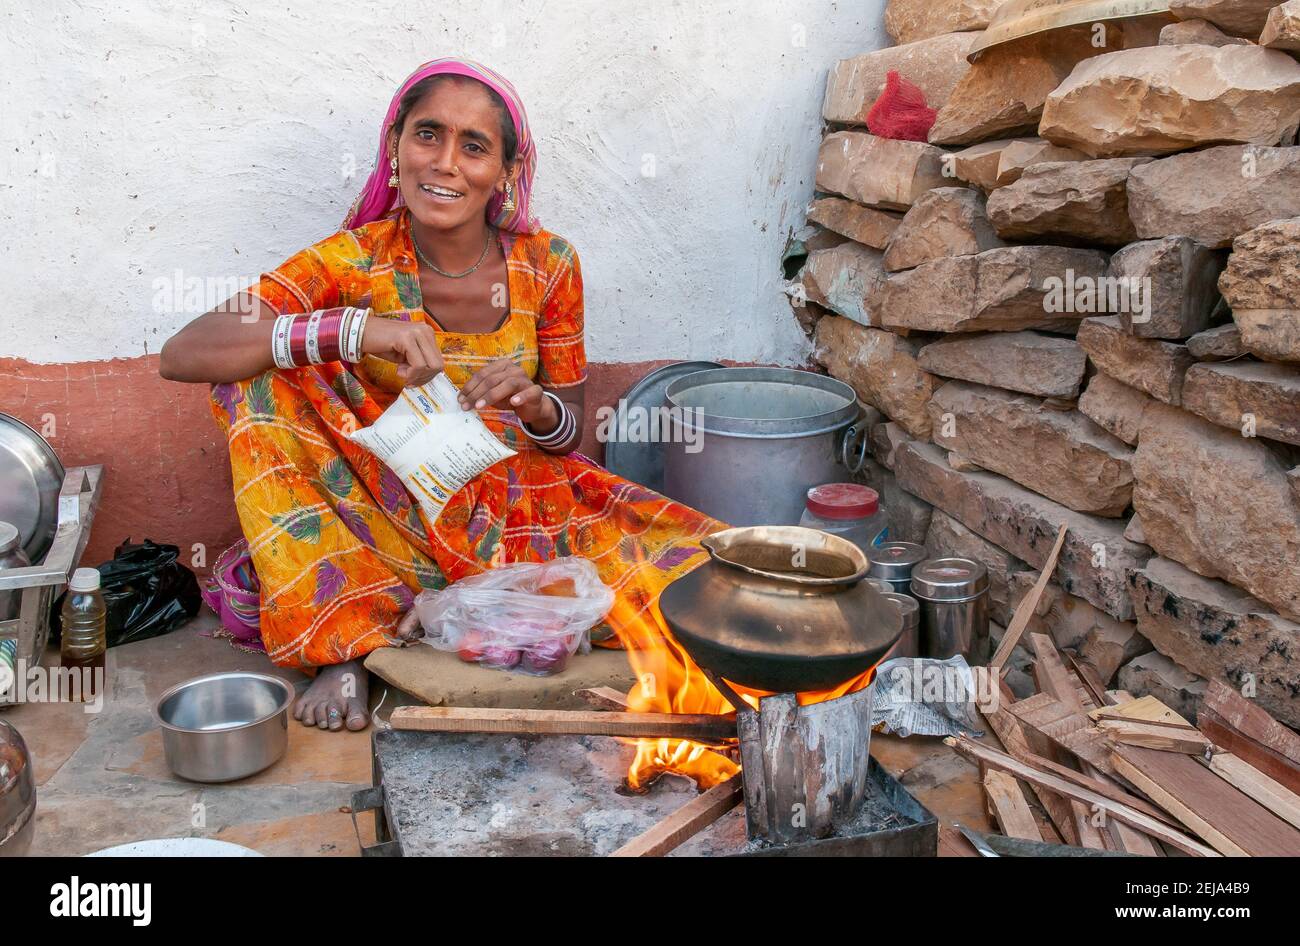 Rajasthan. India. 07-02-2018.Women cooking for children in rural community. Women apart of taking care of children, they have an important role financ Stock Photo